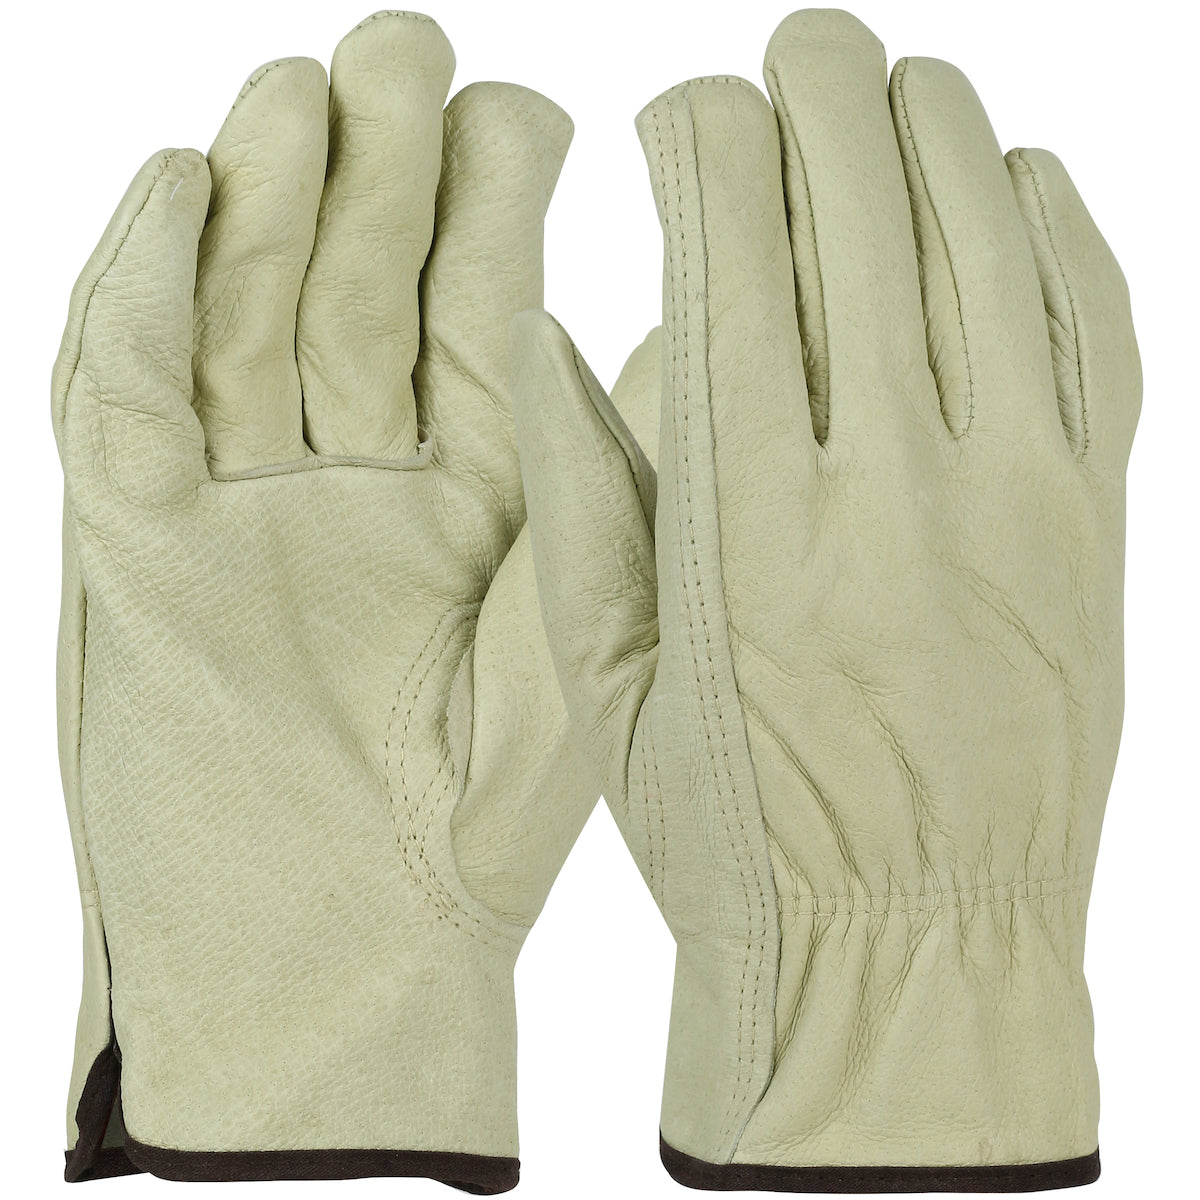 West Chester 994KF/XL Economy Top Grain Pigskin Leather Drivers Glove with Red Fleece Lining - Keystone Thumb